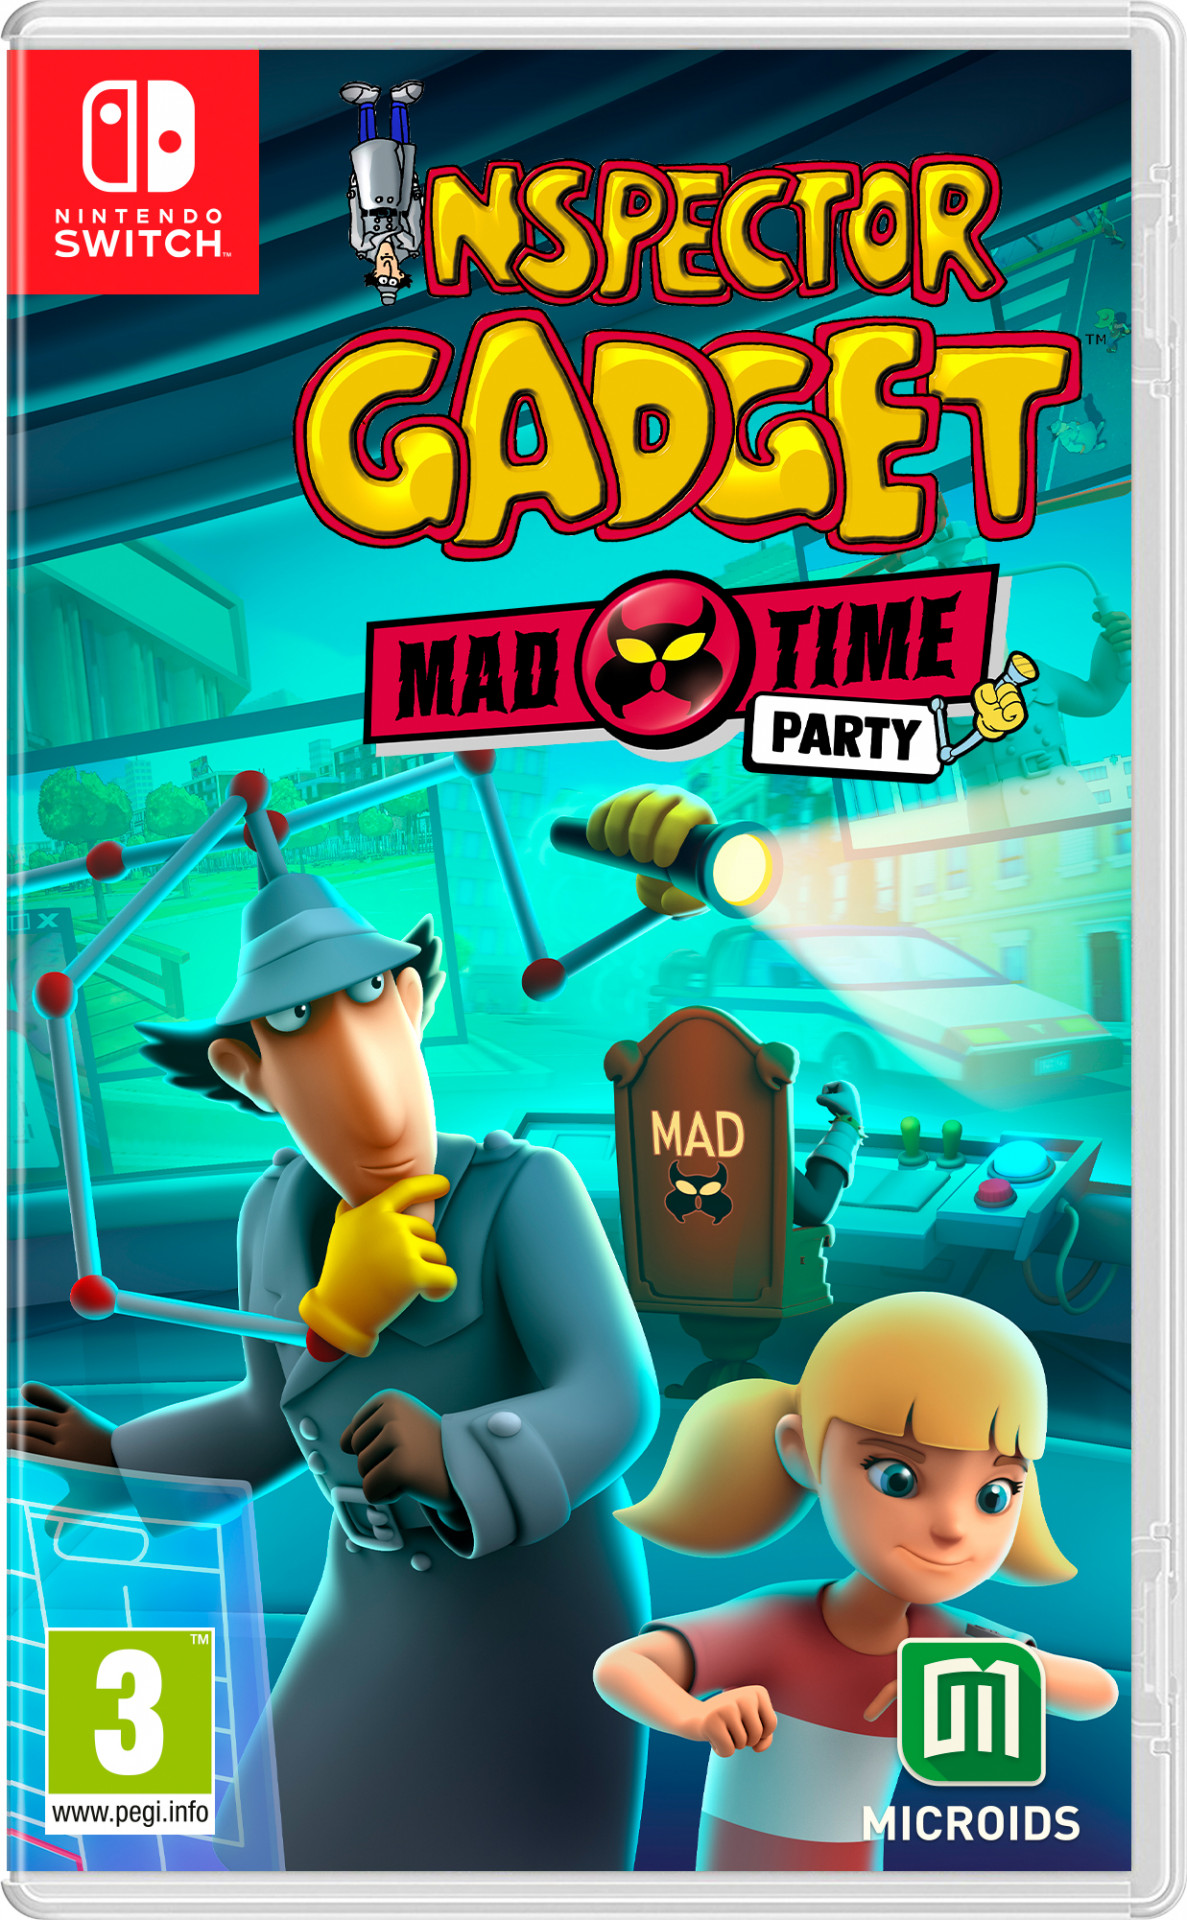 Inspector Gadget: Mad Time Party (Switch), Microids